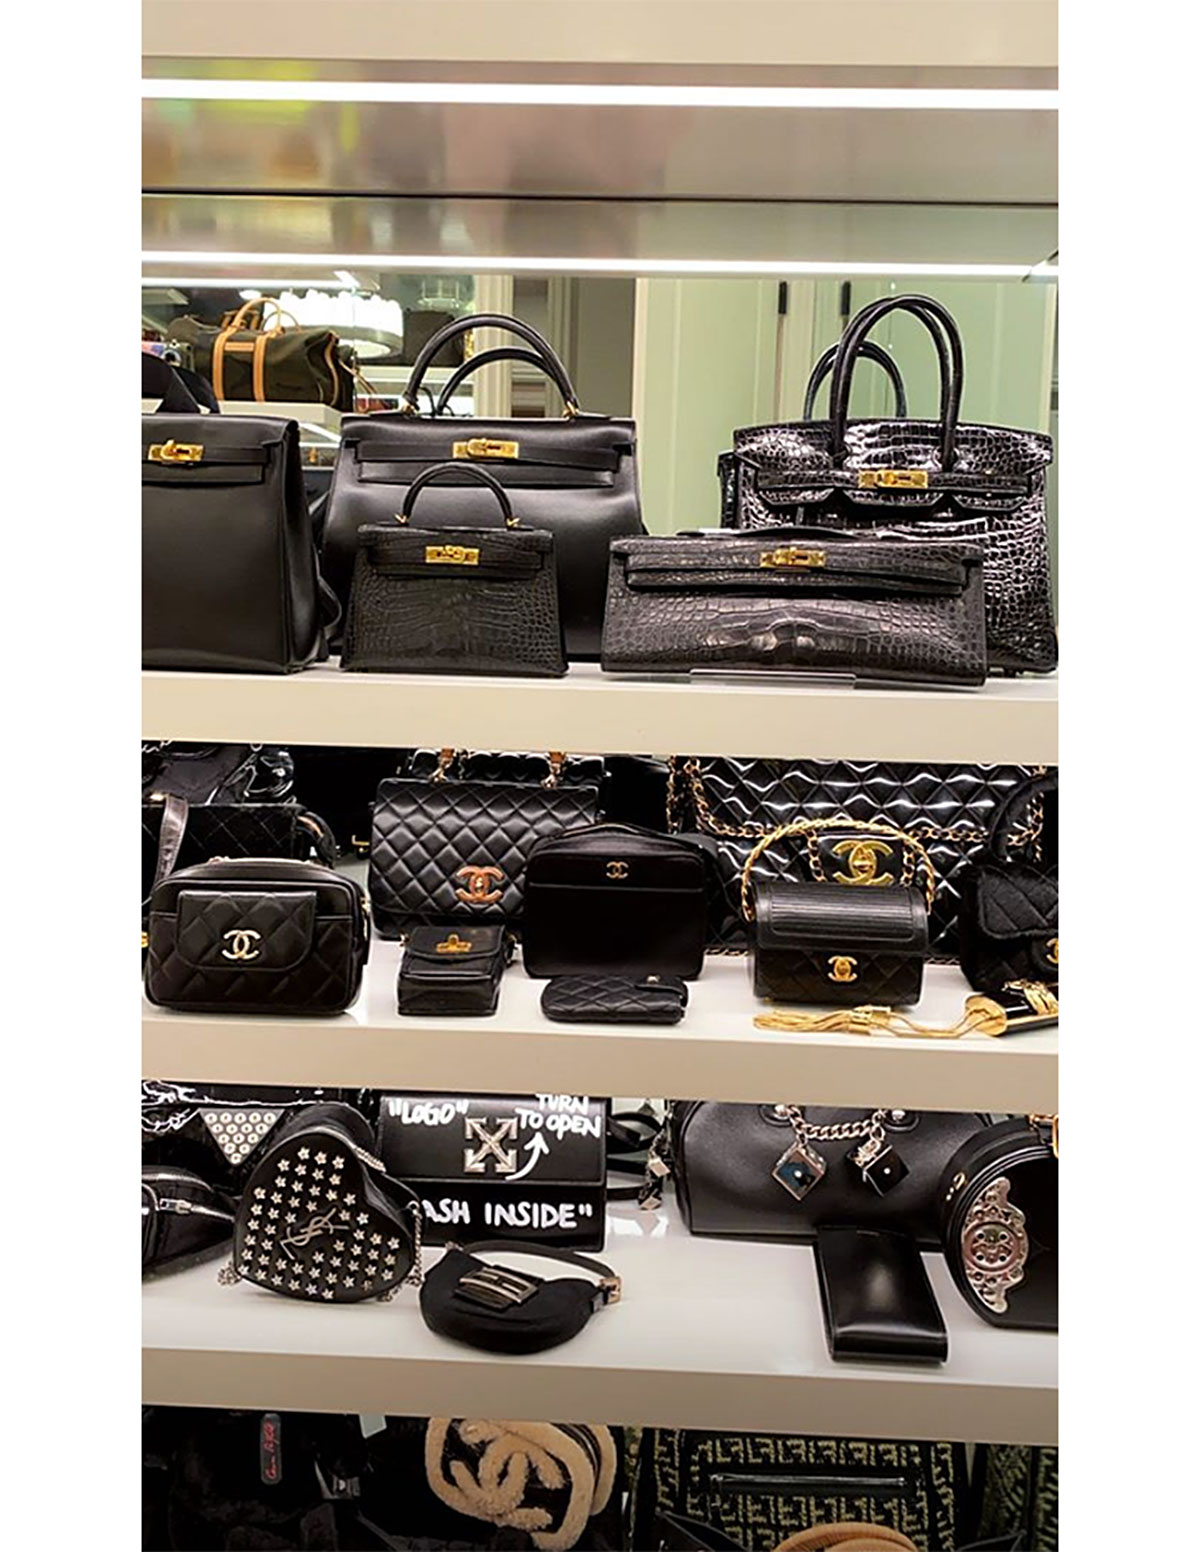 Photos and Videos of Kylie Jenner's Huge Purse Closet - Kylie